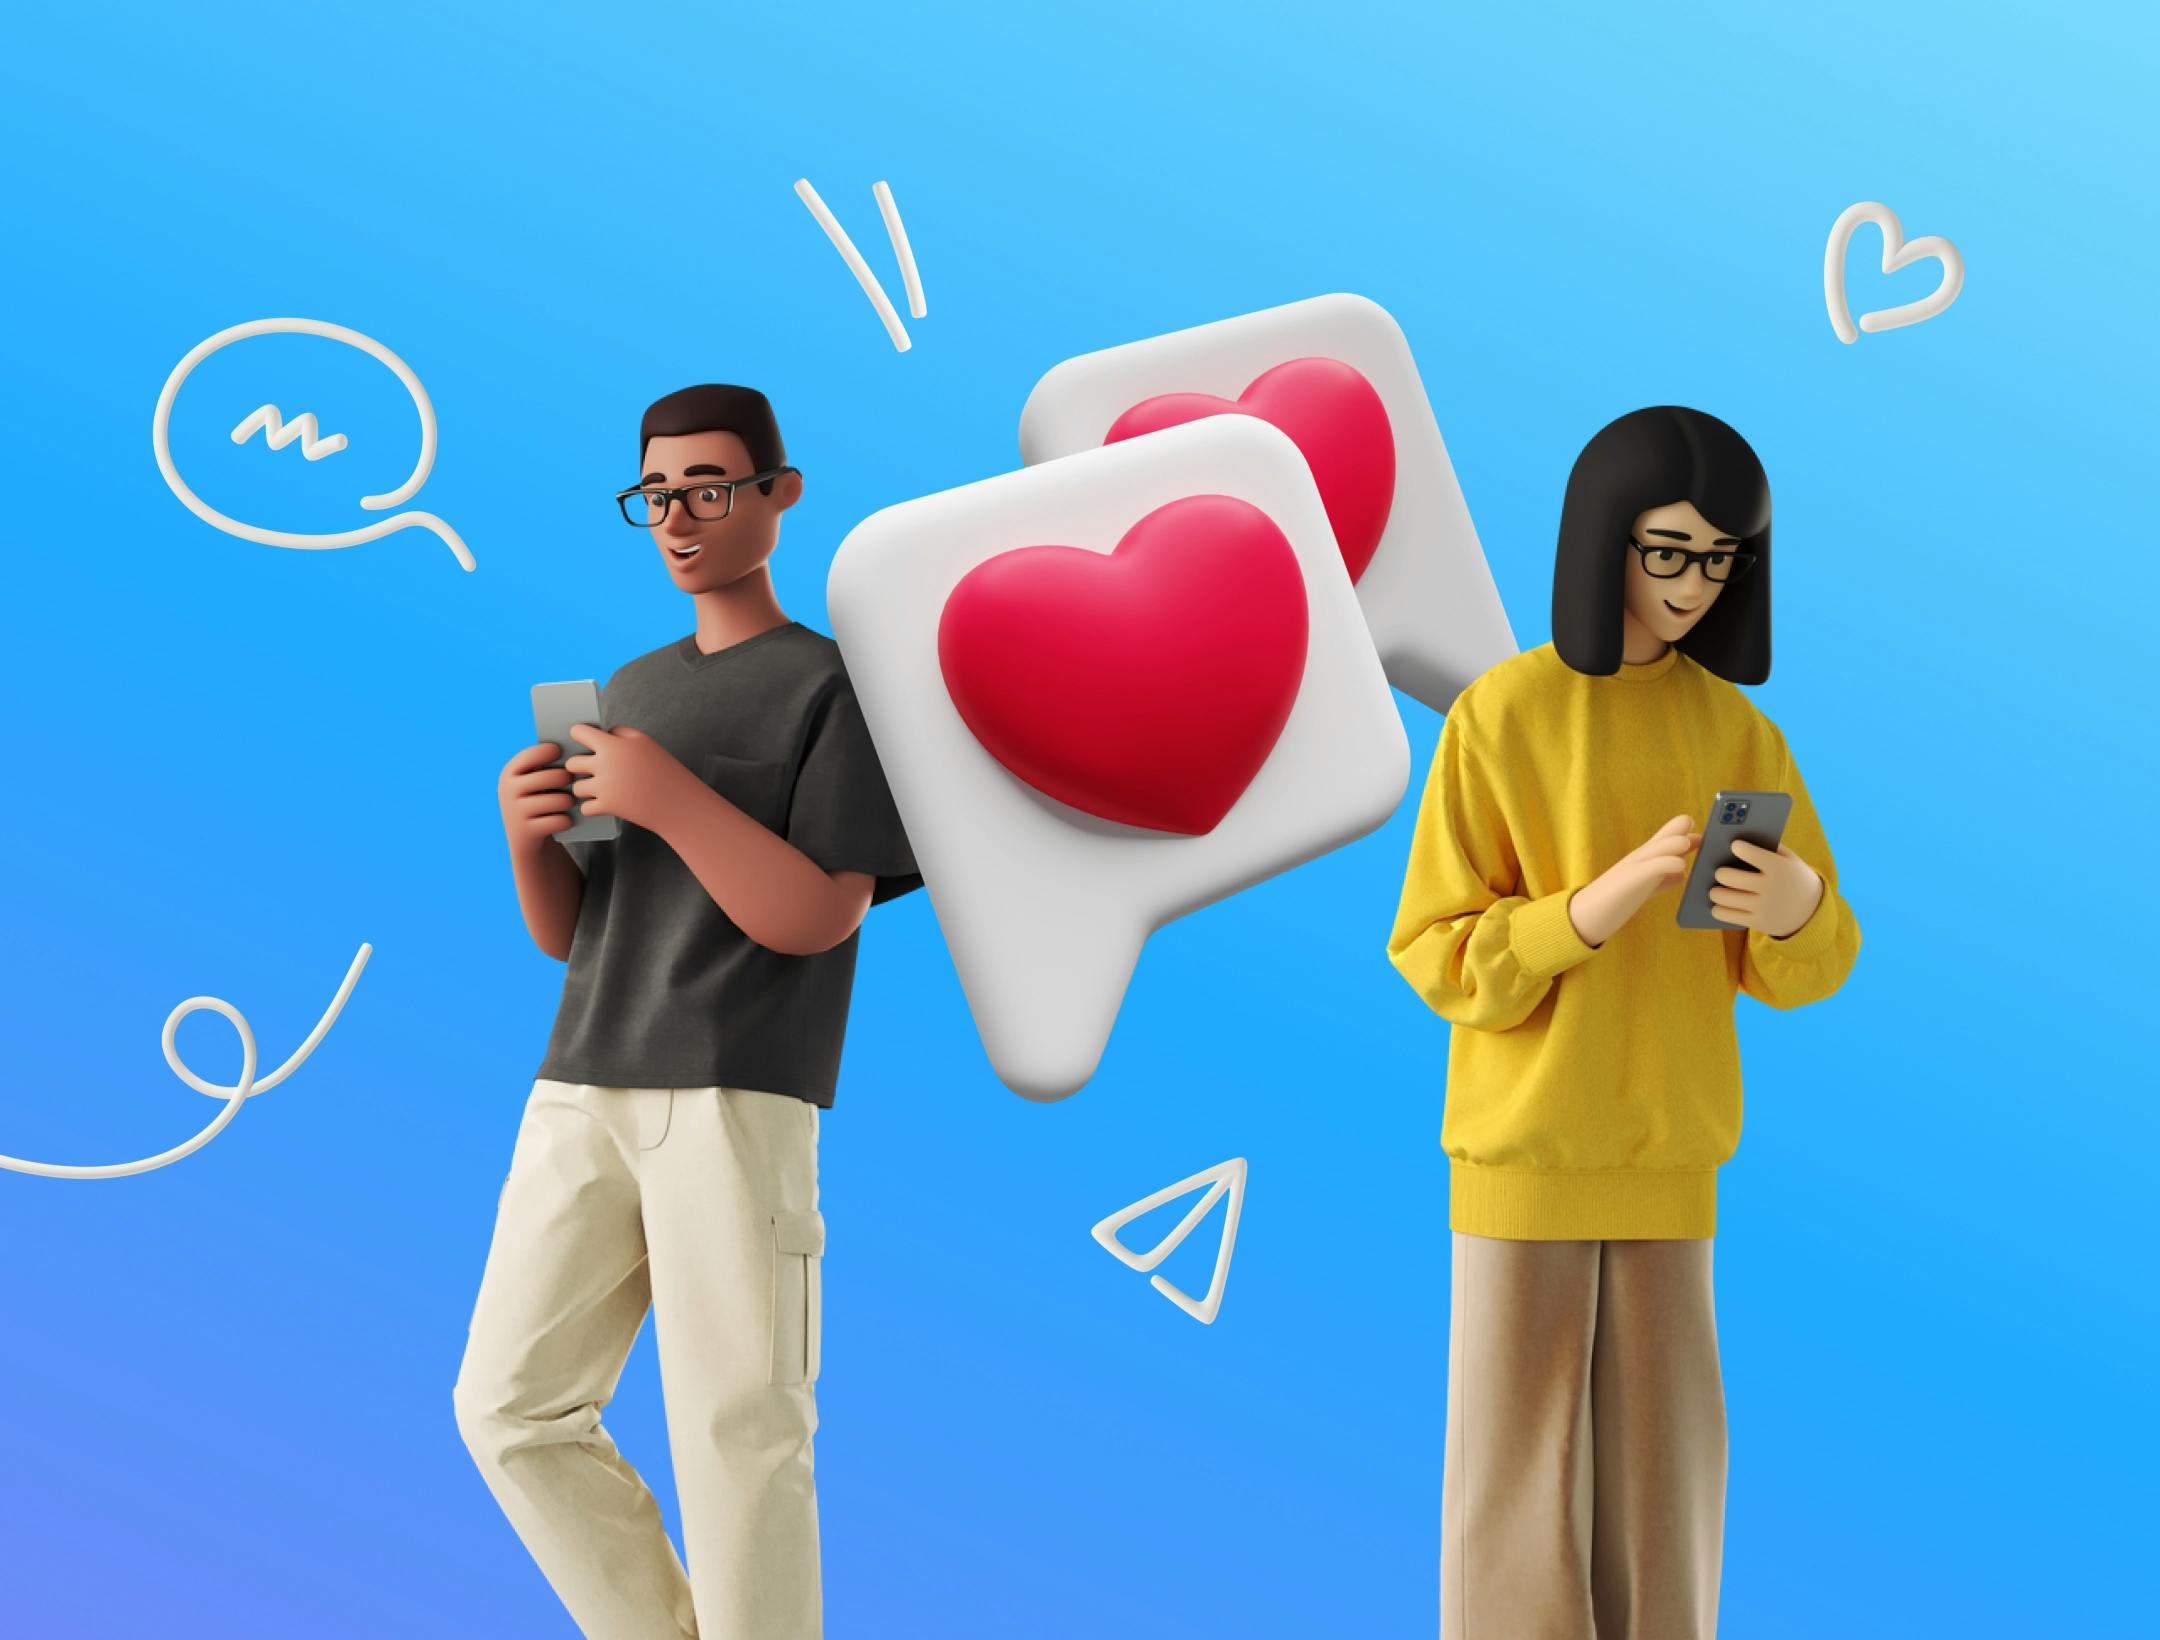 How to make a dating app and what are the costs?